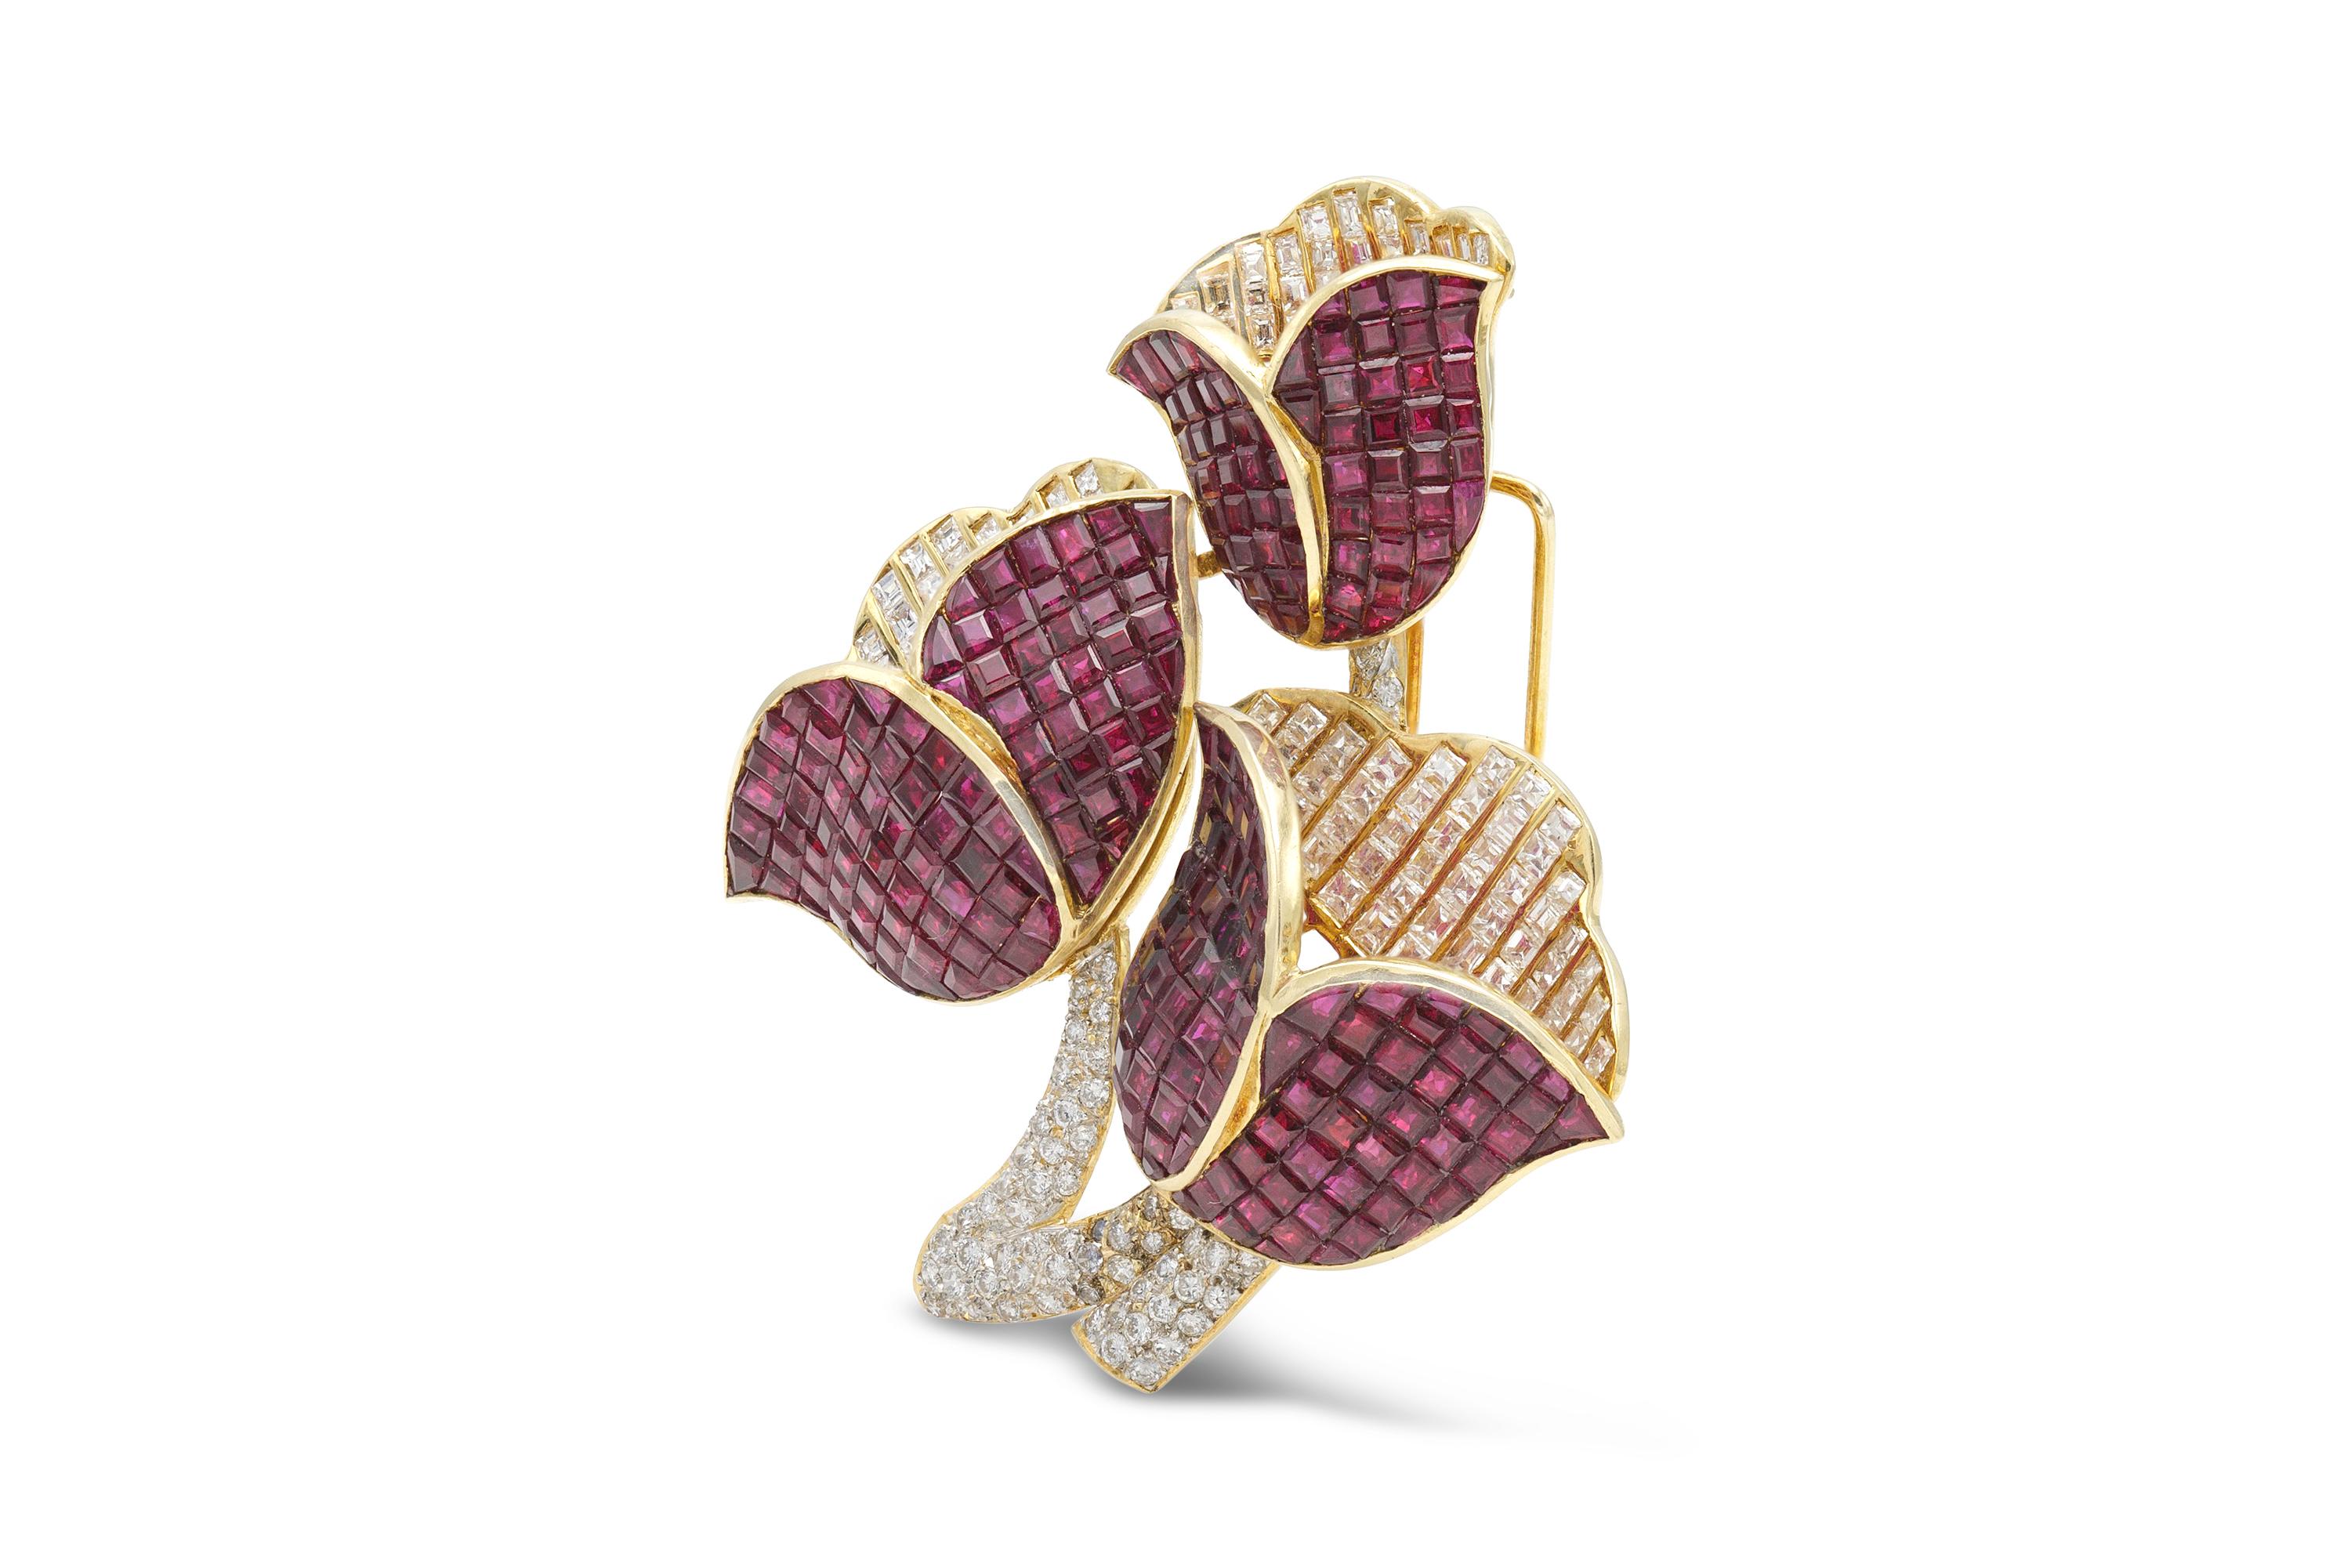 Finely crafted in 18k yellow gold with Square cut Rubies weighing approximately a total of 13.00 carats, Square and Round cut Diamonds weighing approximately a total of 10.00 carats.
Circa 1980s